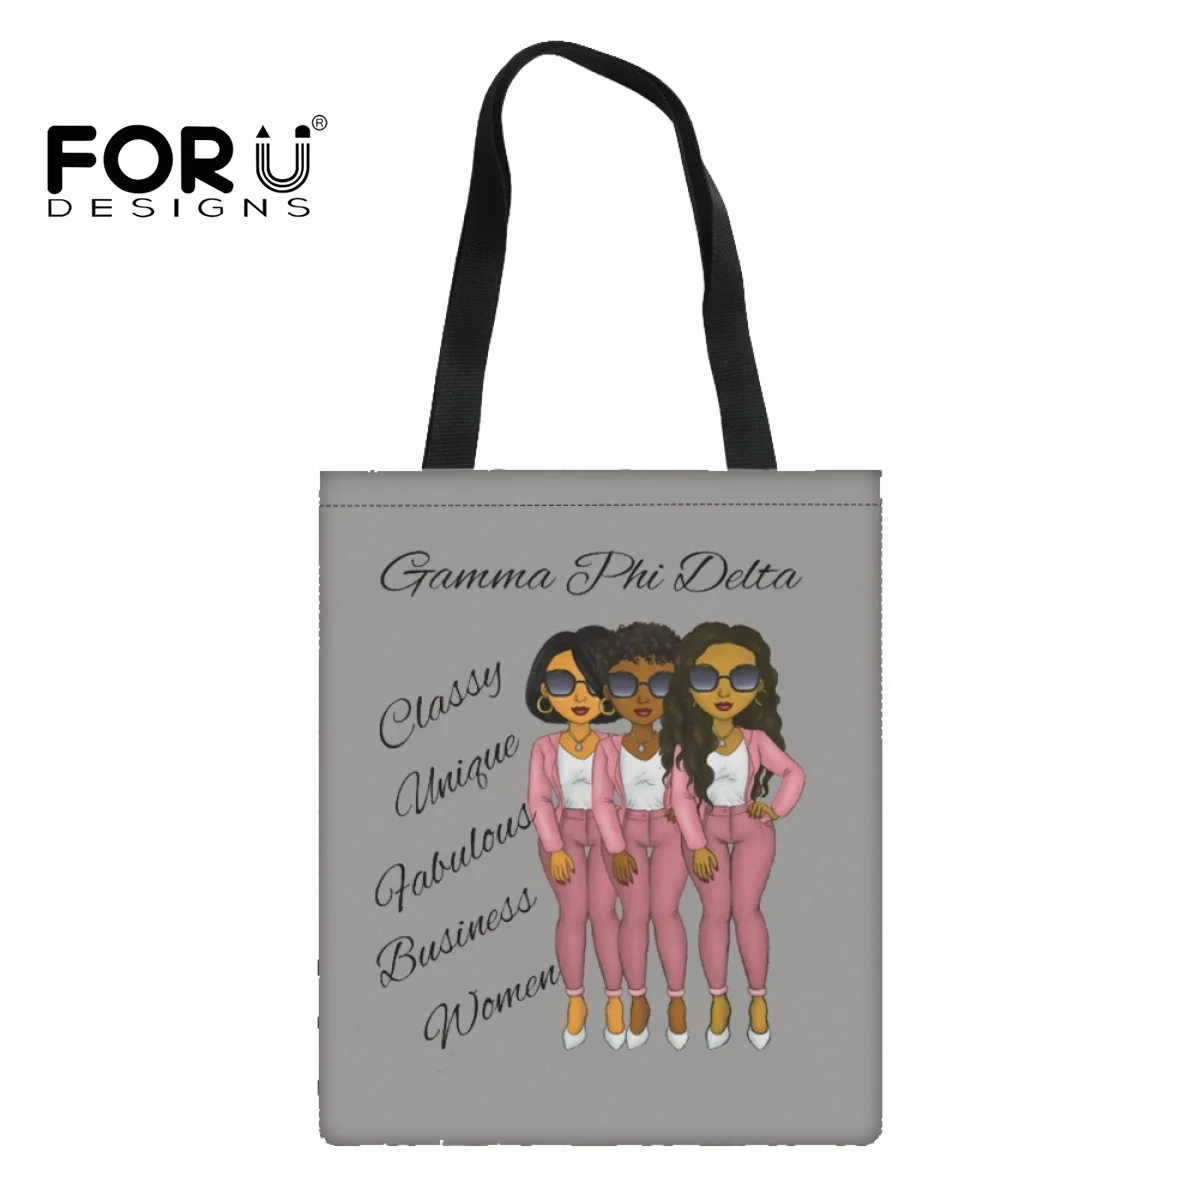 

FORUDESIGNS Foldable Shopping Bag Tote Travel Eco Reusable Shopping Bags Gamma Phi Delta Portable Shoulder Grocery Bags Storage